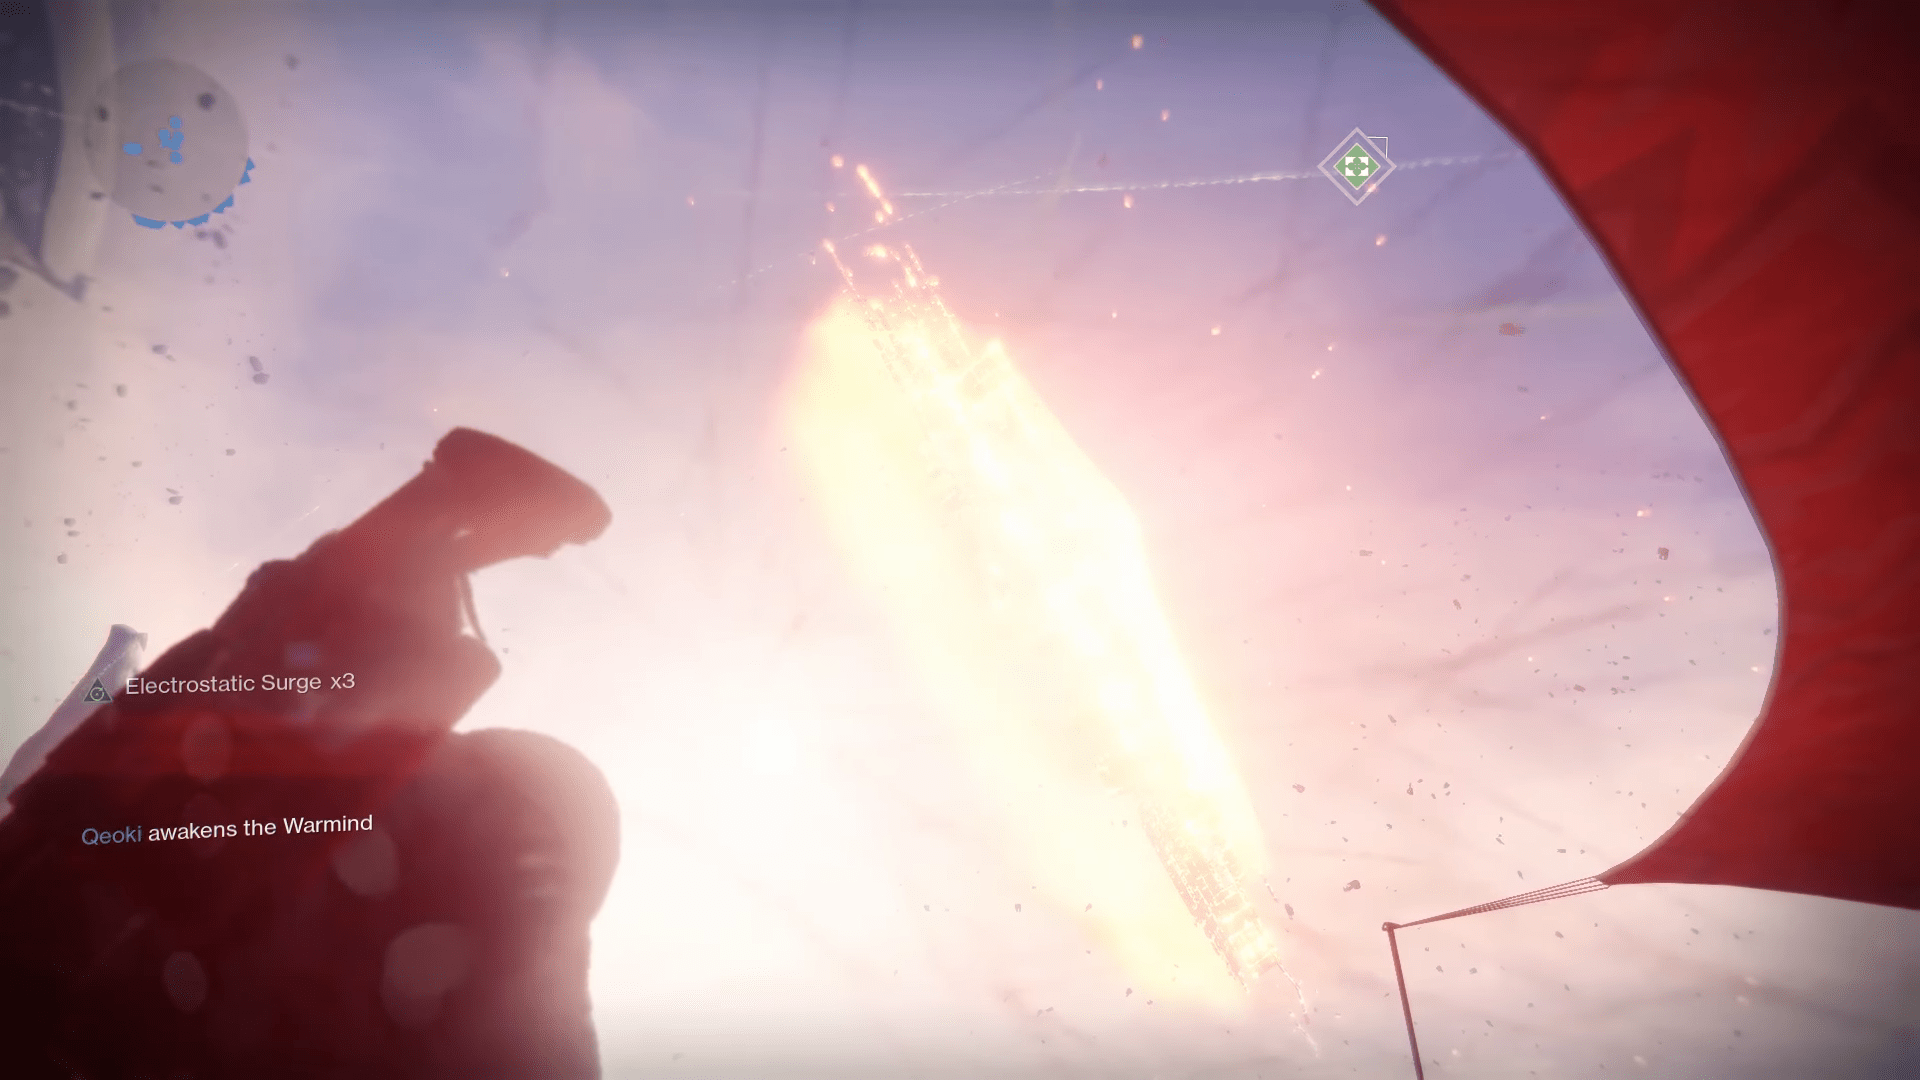 Destiny 2 First Live Event: The Almighty Destroyed In A Spectacularly Slow Sequence